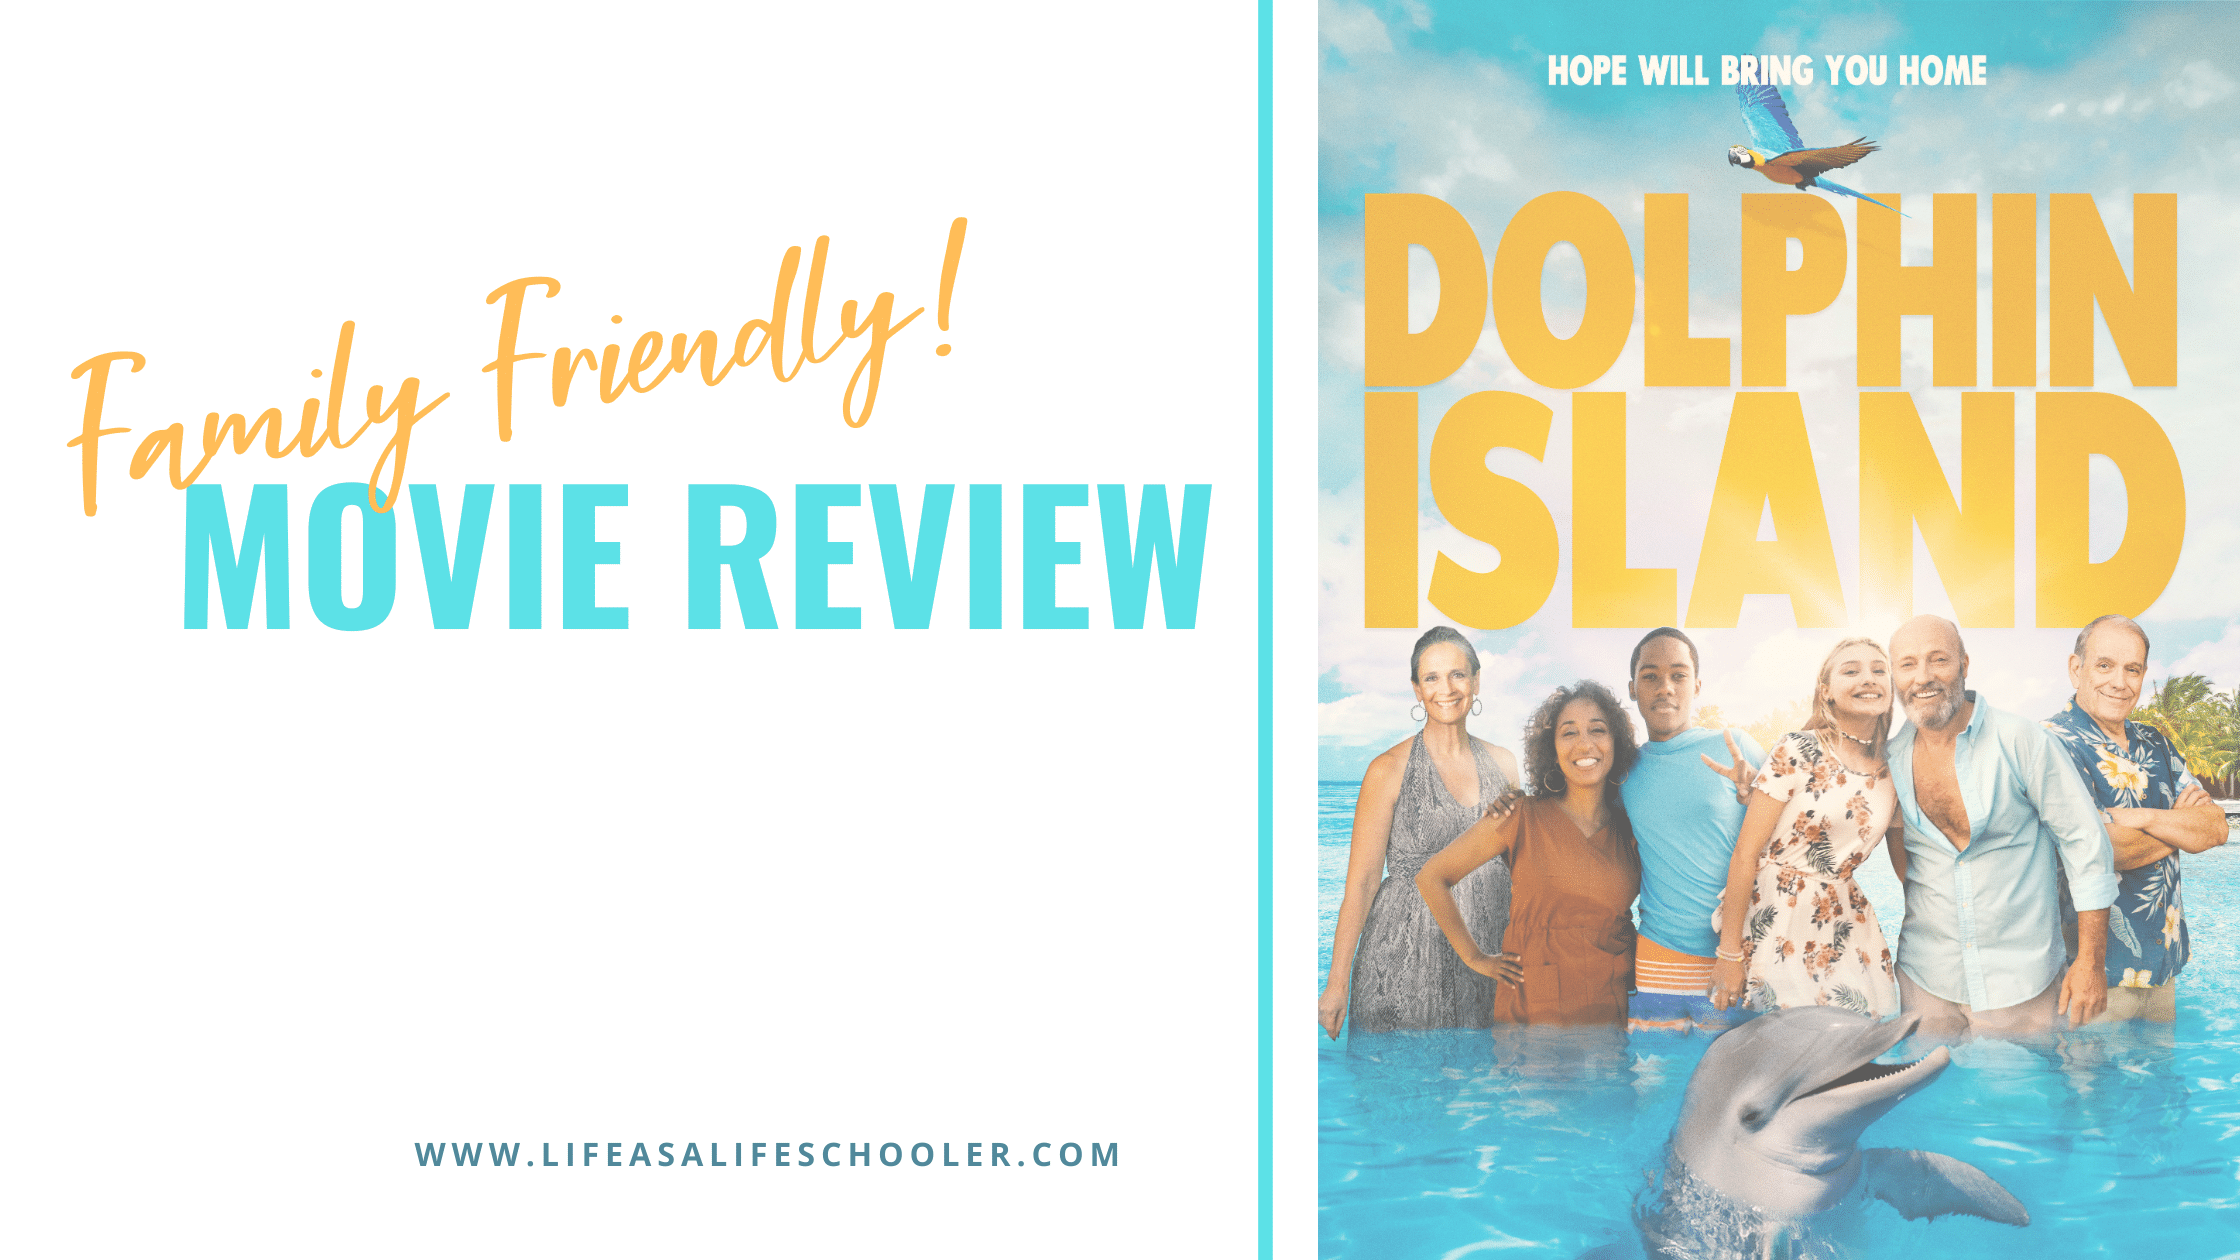 movie review: dolphin island